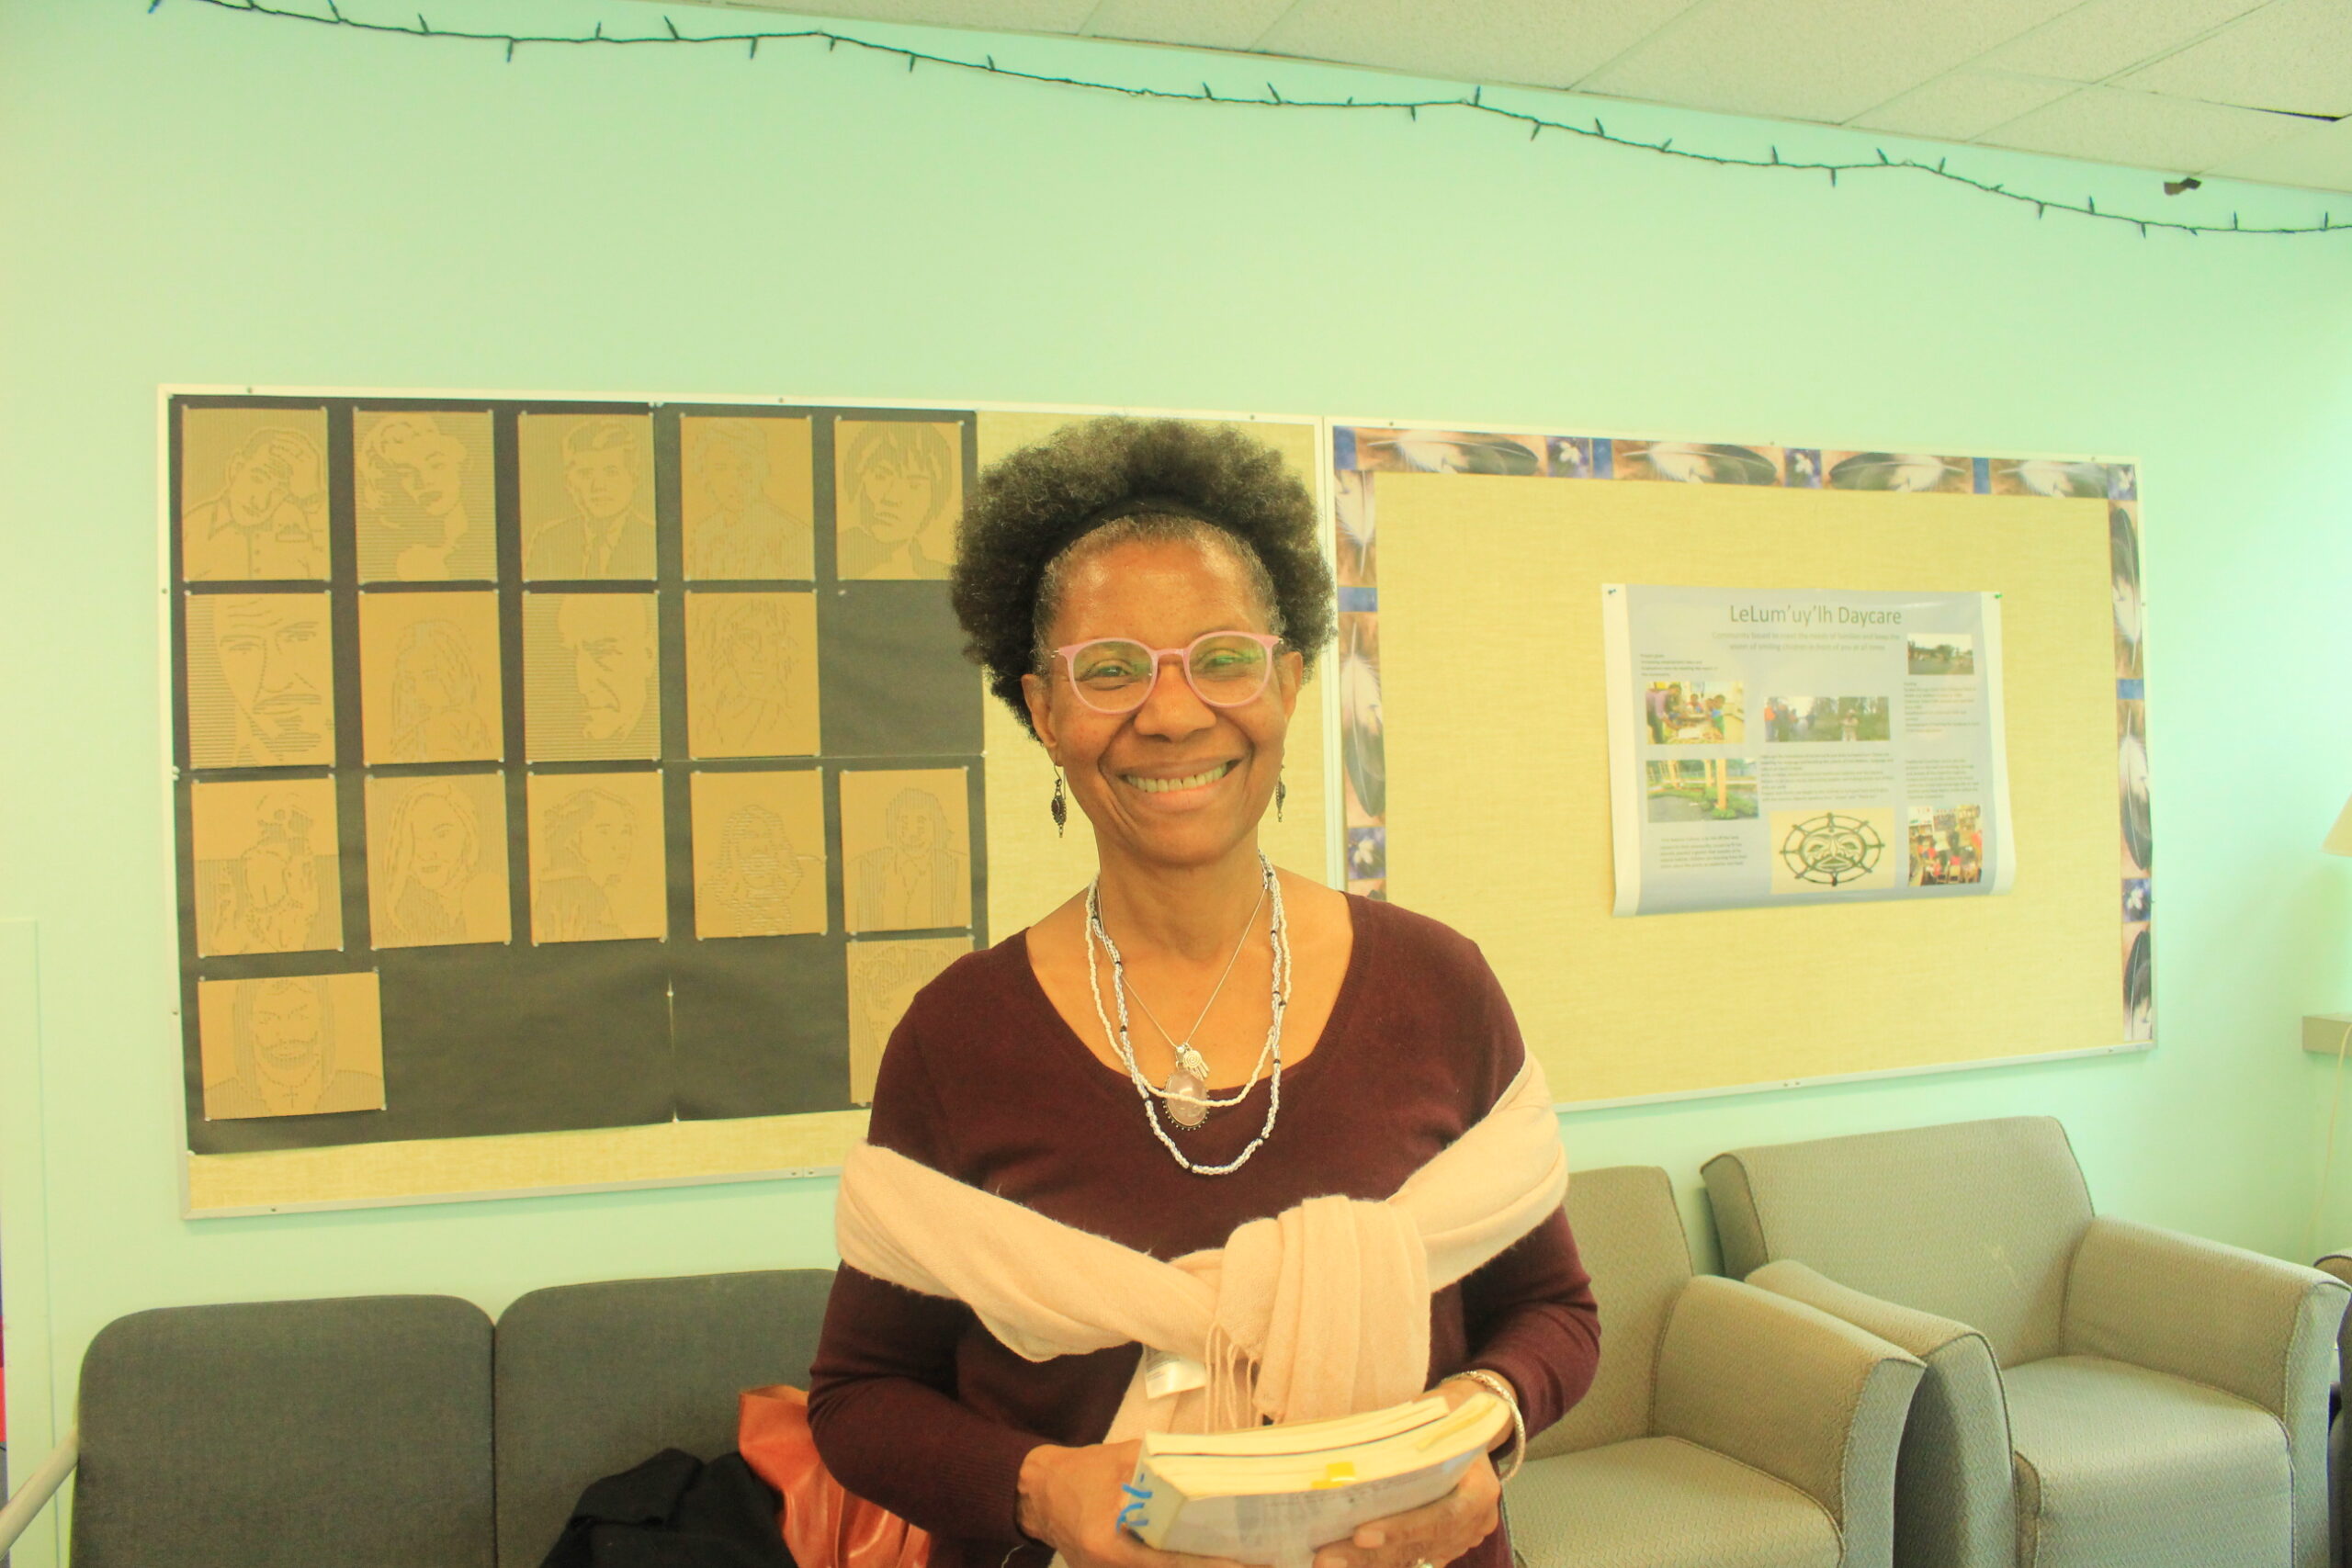 The poet and writer, NourbeSe Philip holding her published books and smiling at the camera. Located in It was in the lounge across from the auditorium (Rm 211) in building 355.